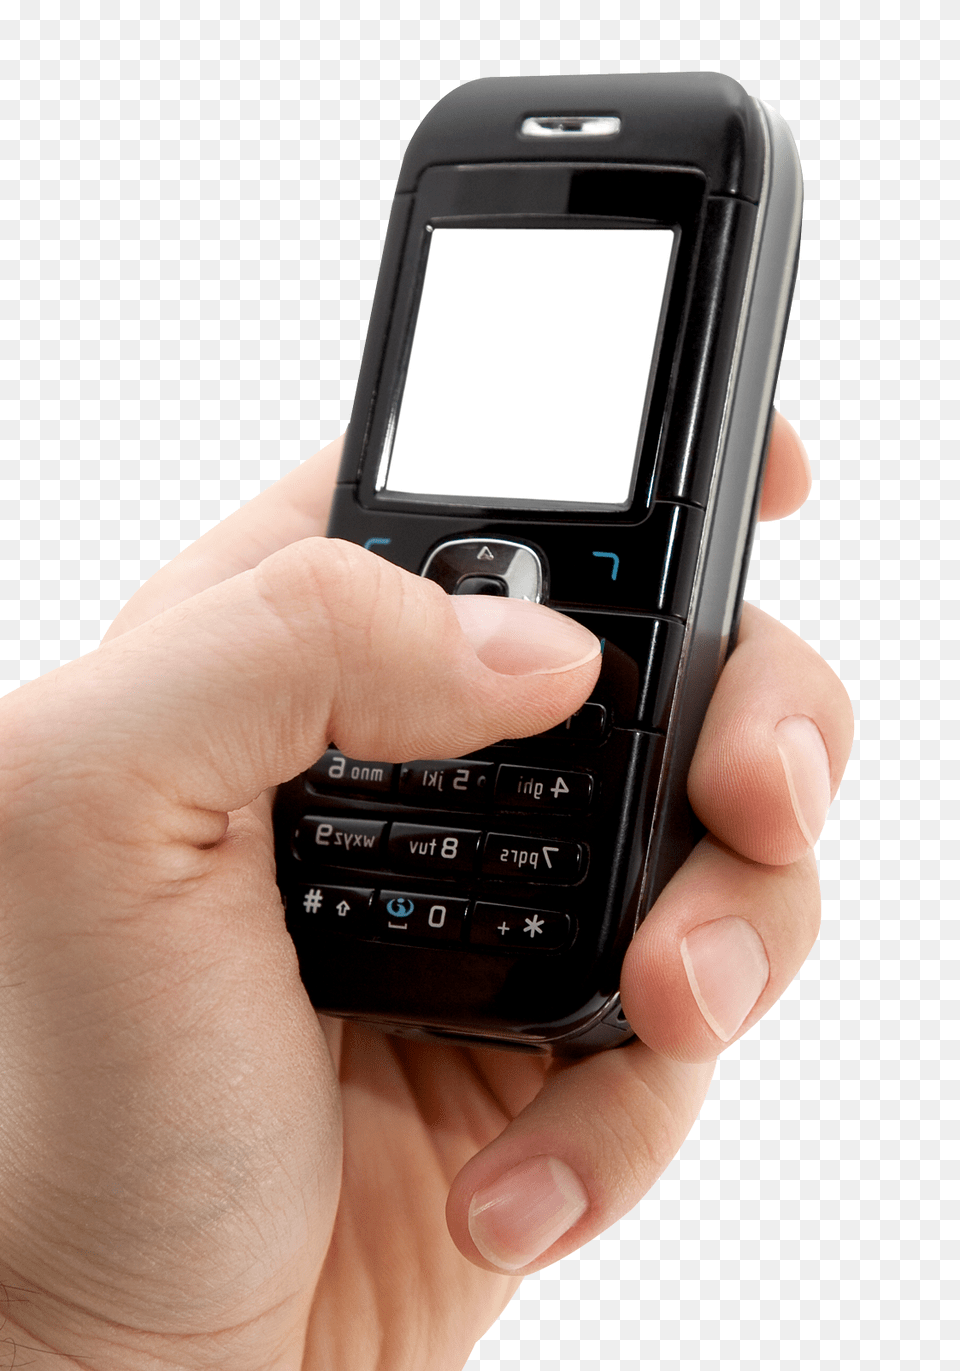 Mobile Phone In Hand Image, Electronics, Mobile Phone, Texting Free Png Download